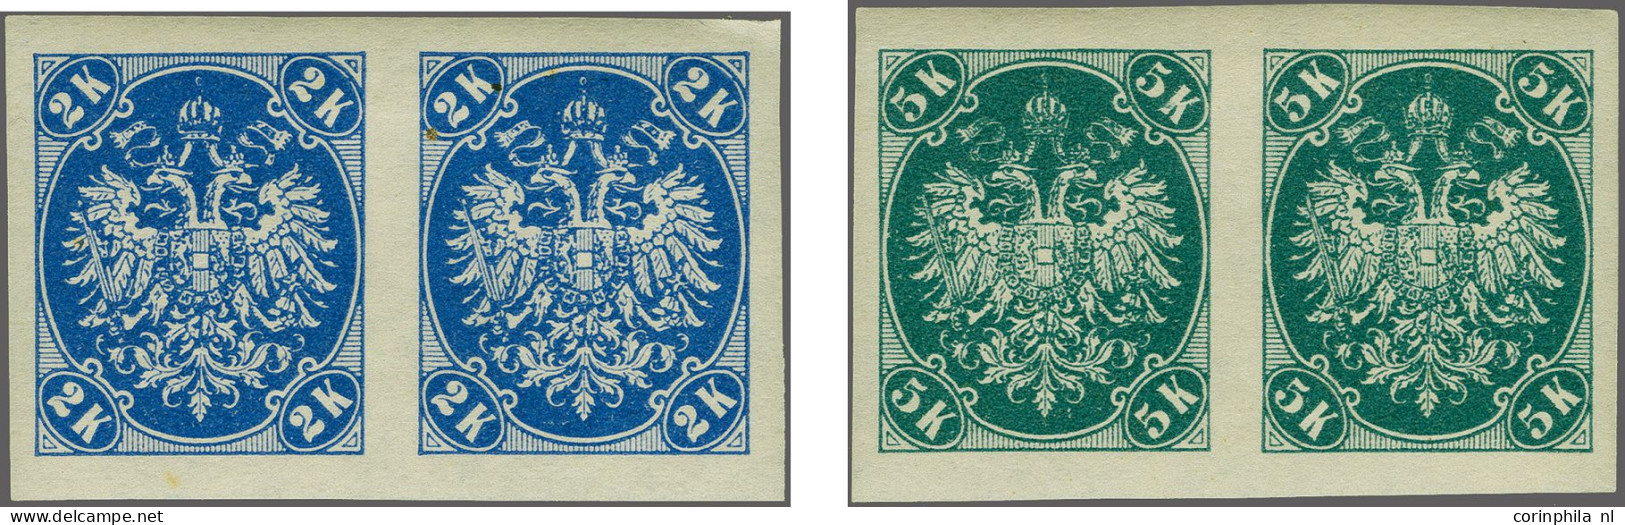 Mounted Mint Coat Of Arms 1-10 Heller, 25 Heller And 50 Heller - 5 Kronen With Variety Imperforate In Pairs, Very Fine M - Bosnia And Herzegovina